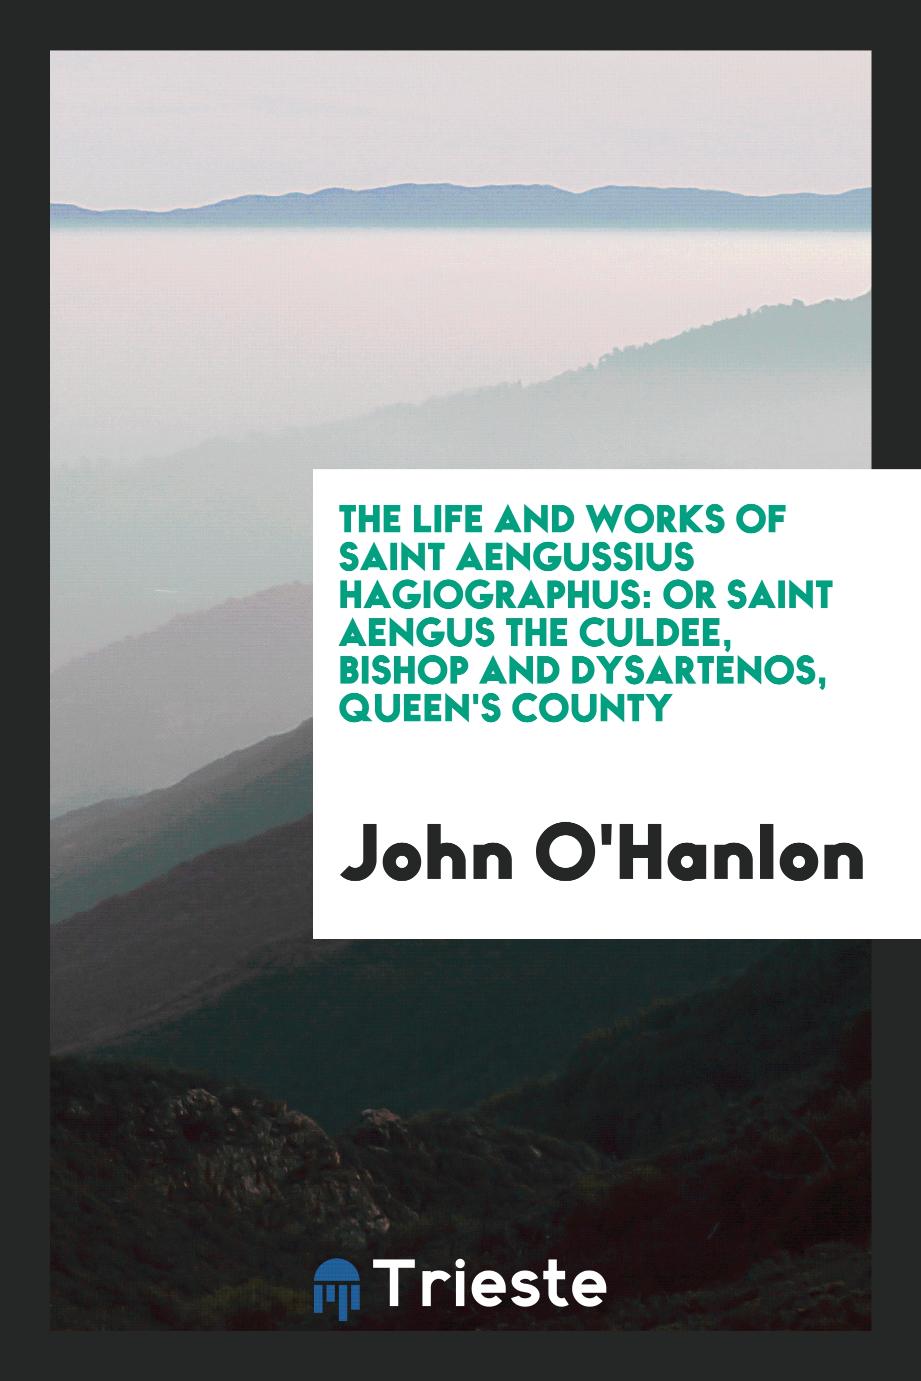 The Life and Works of Saint Aengussius Hagiographus: Or Saint Aengus the Culdee, Bishop and Dysartenos, Queen's County